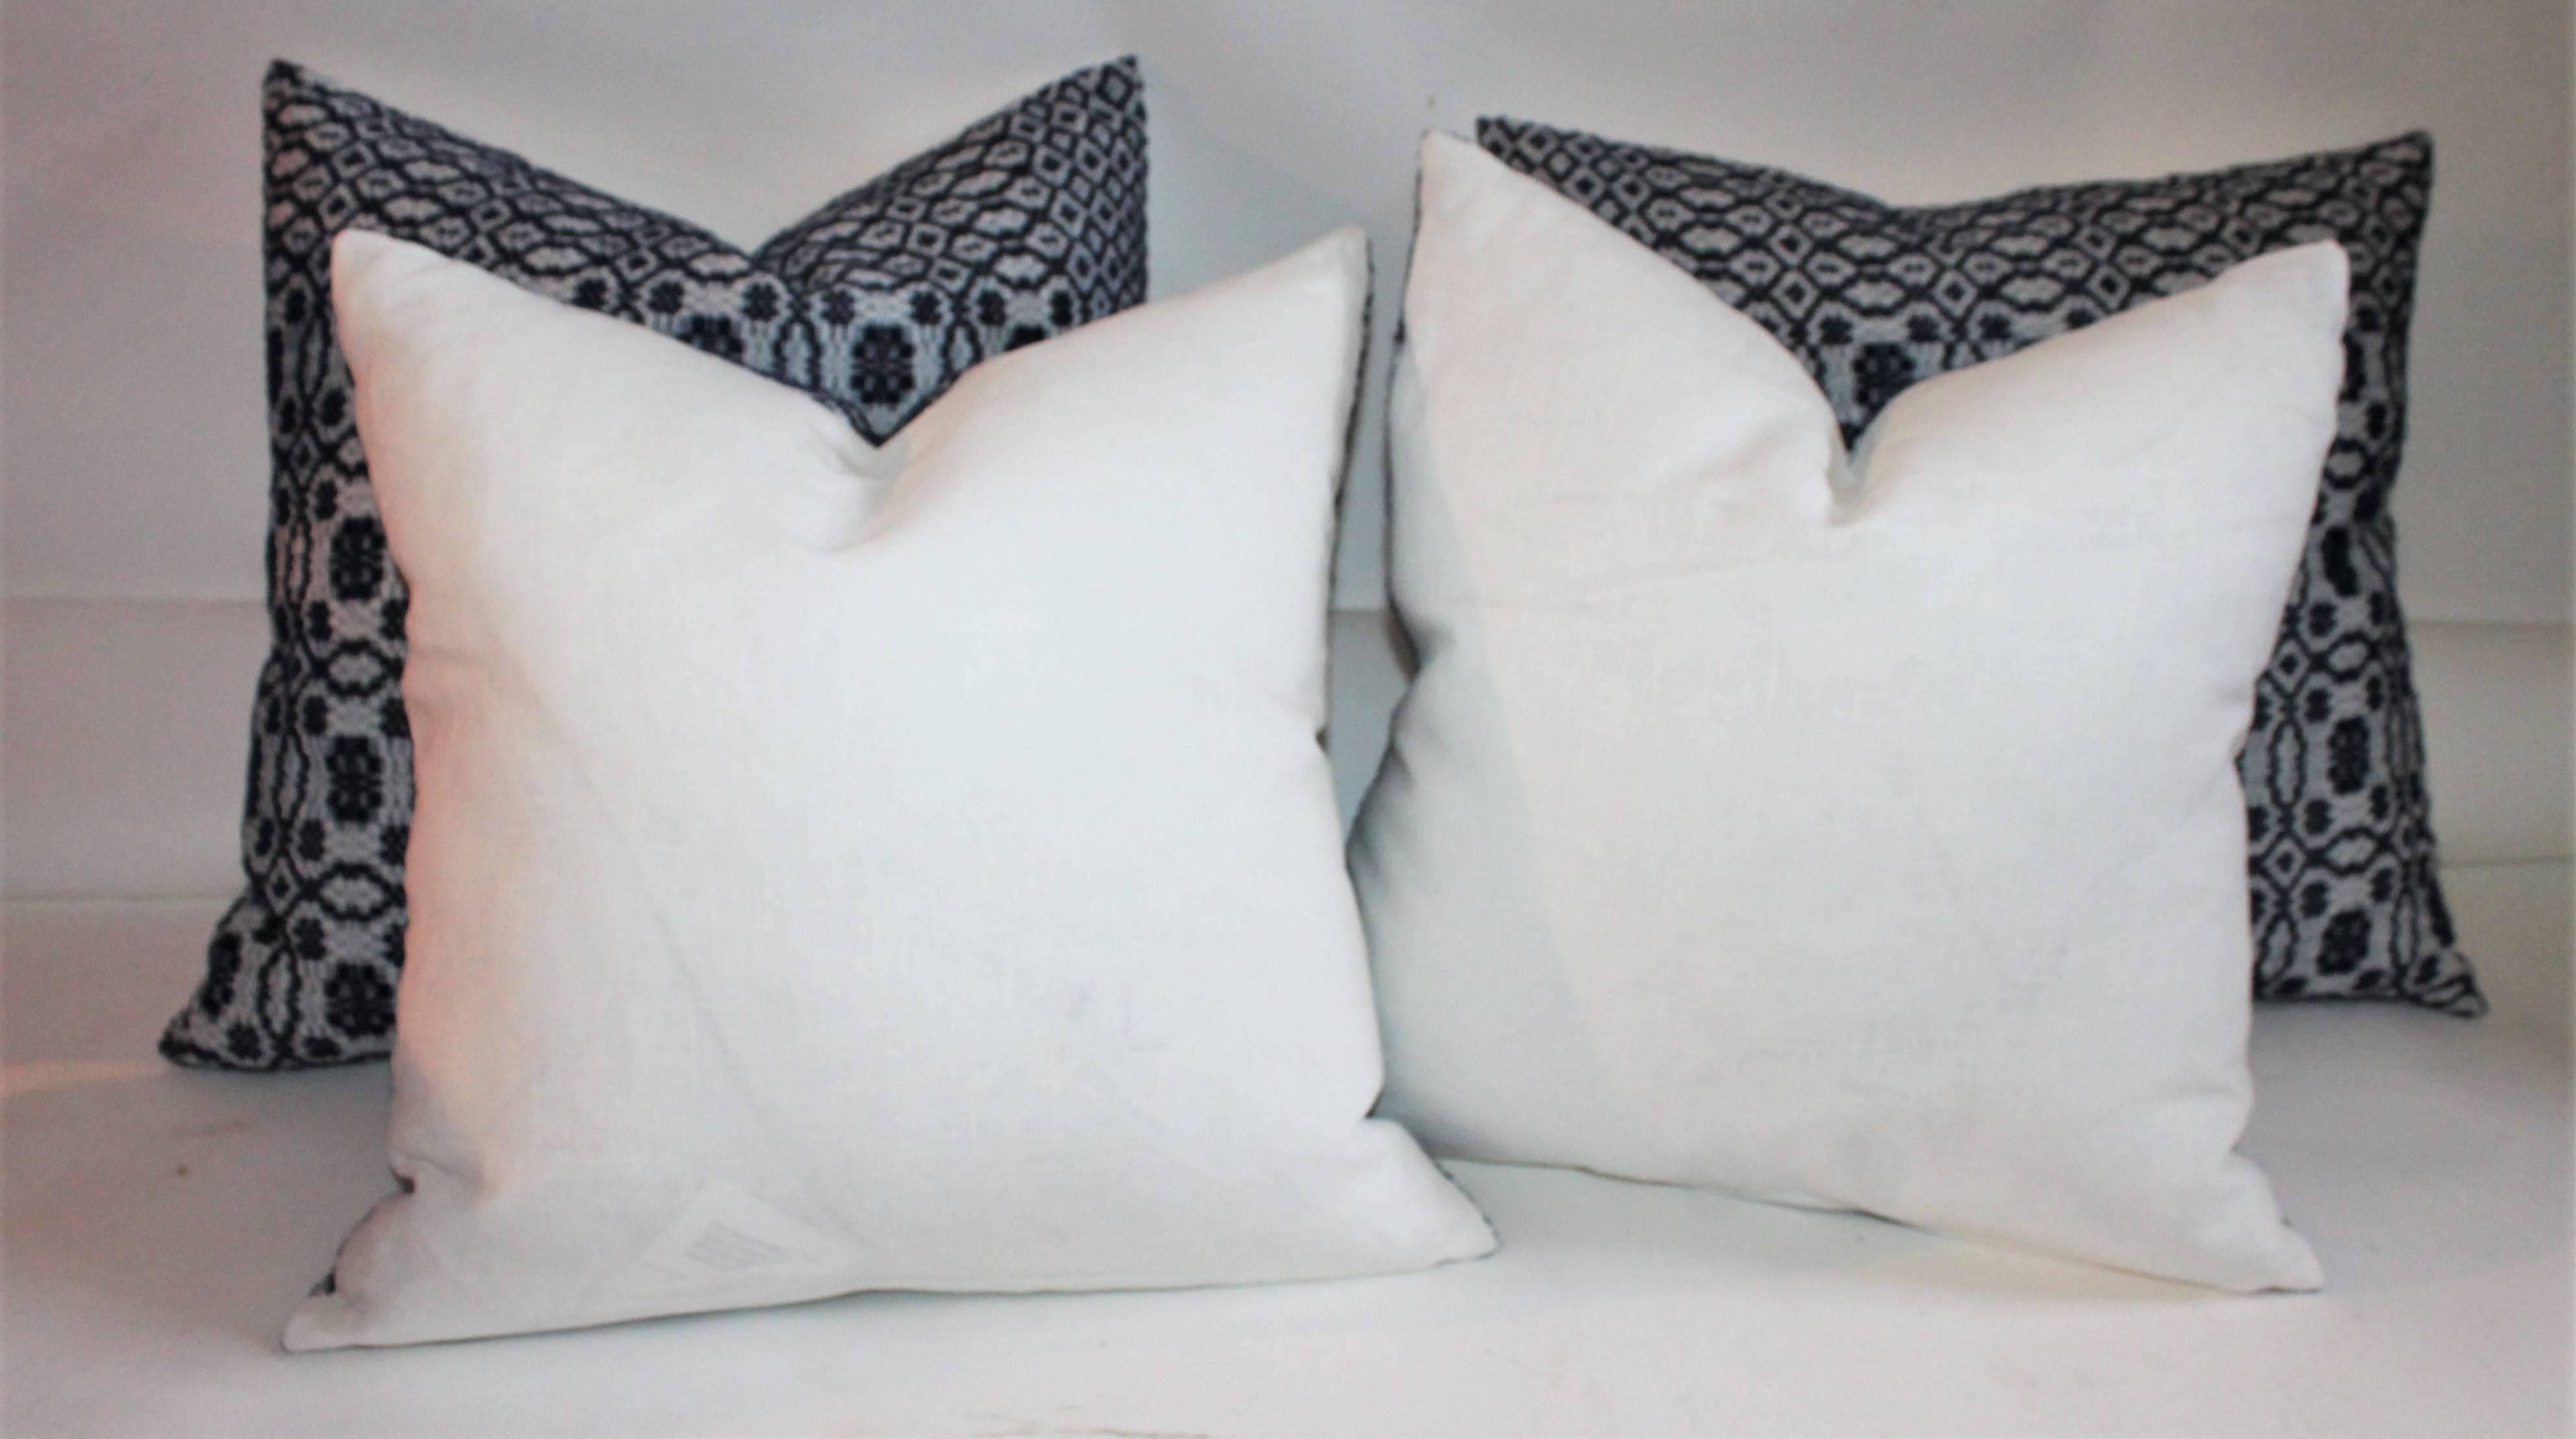 Hand-Crafted Vintage Jacquard Coverlet Pillows, Collection of Four